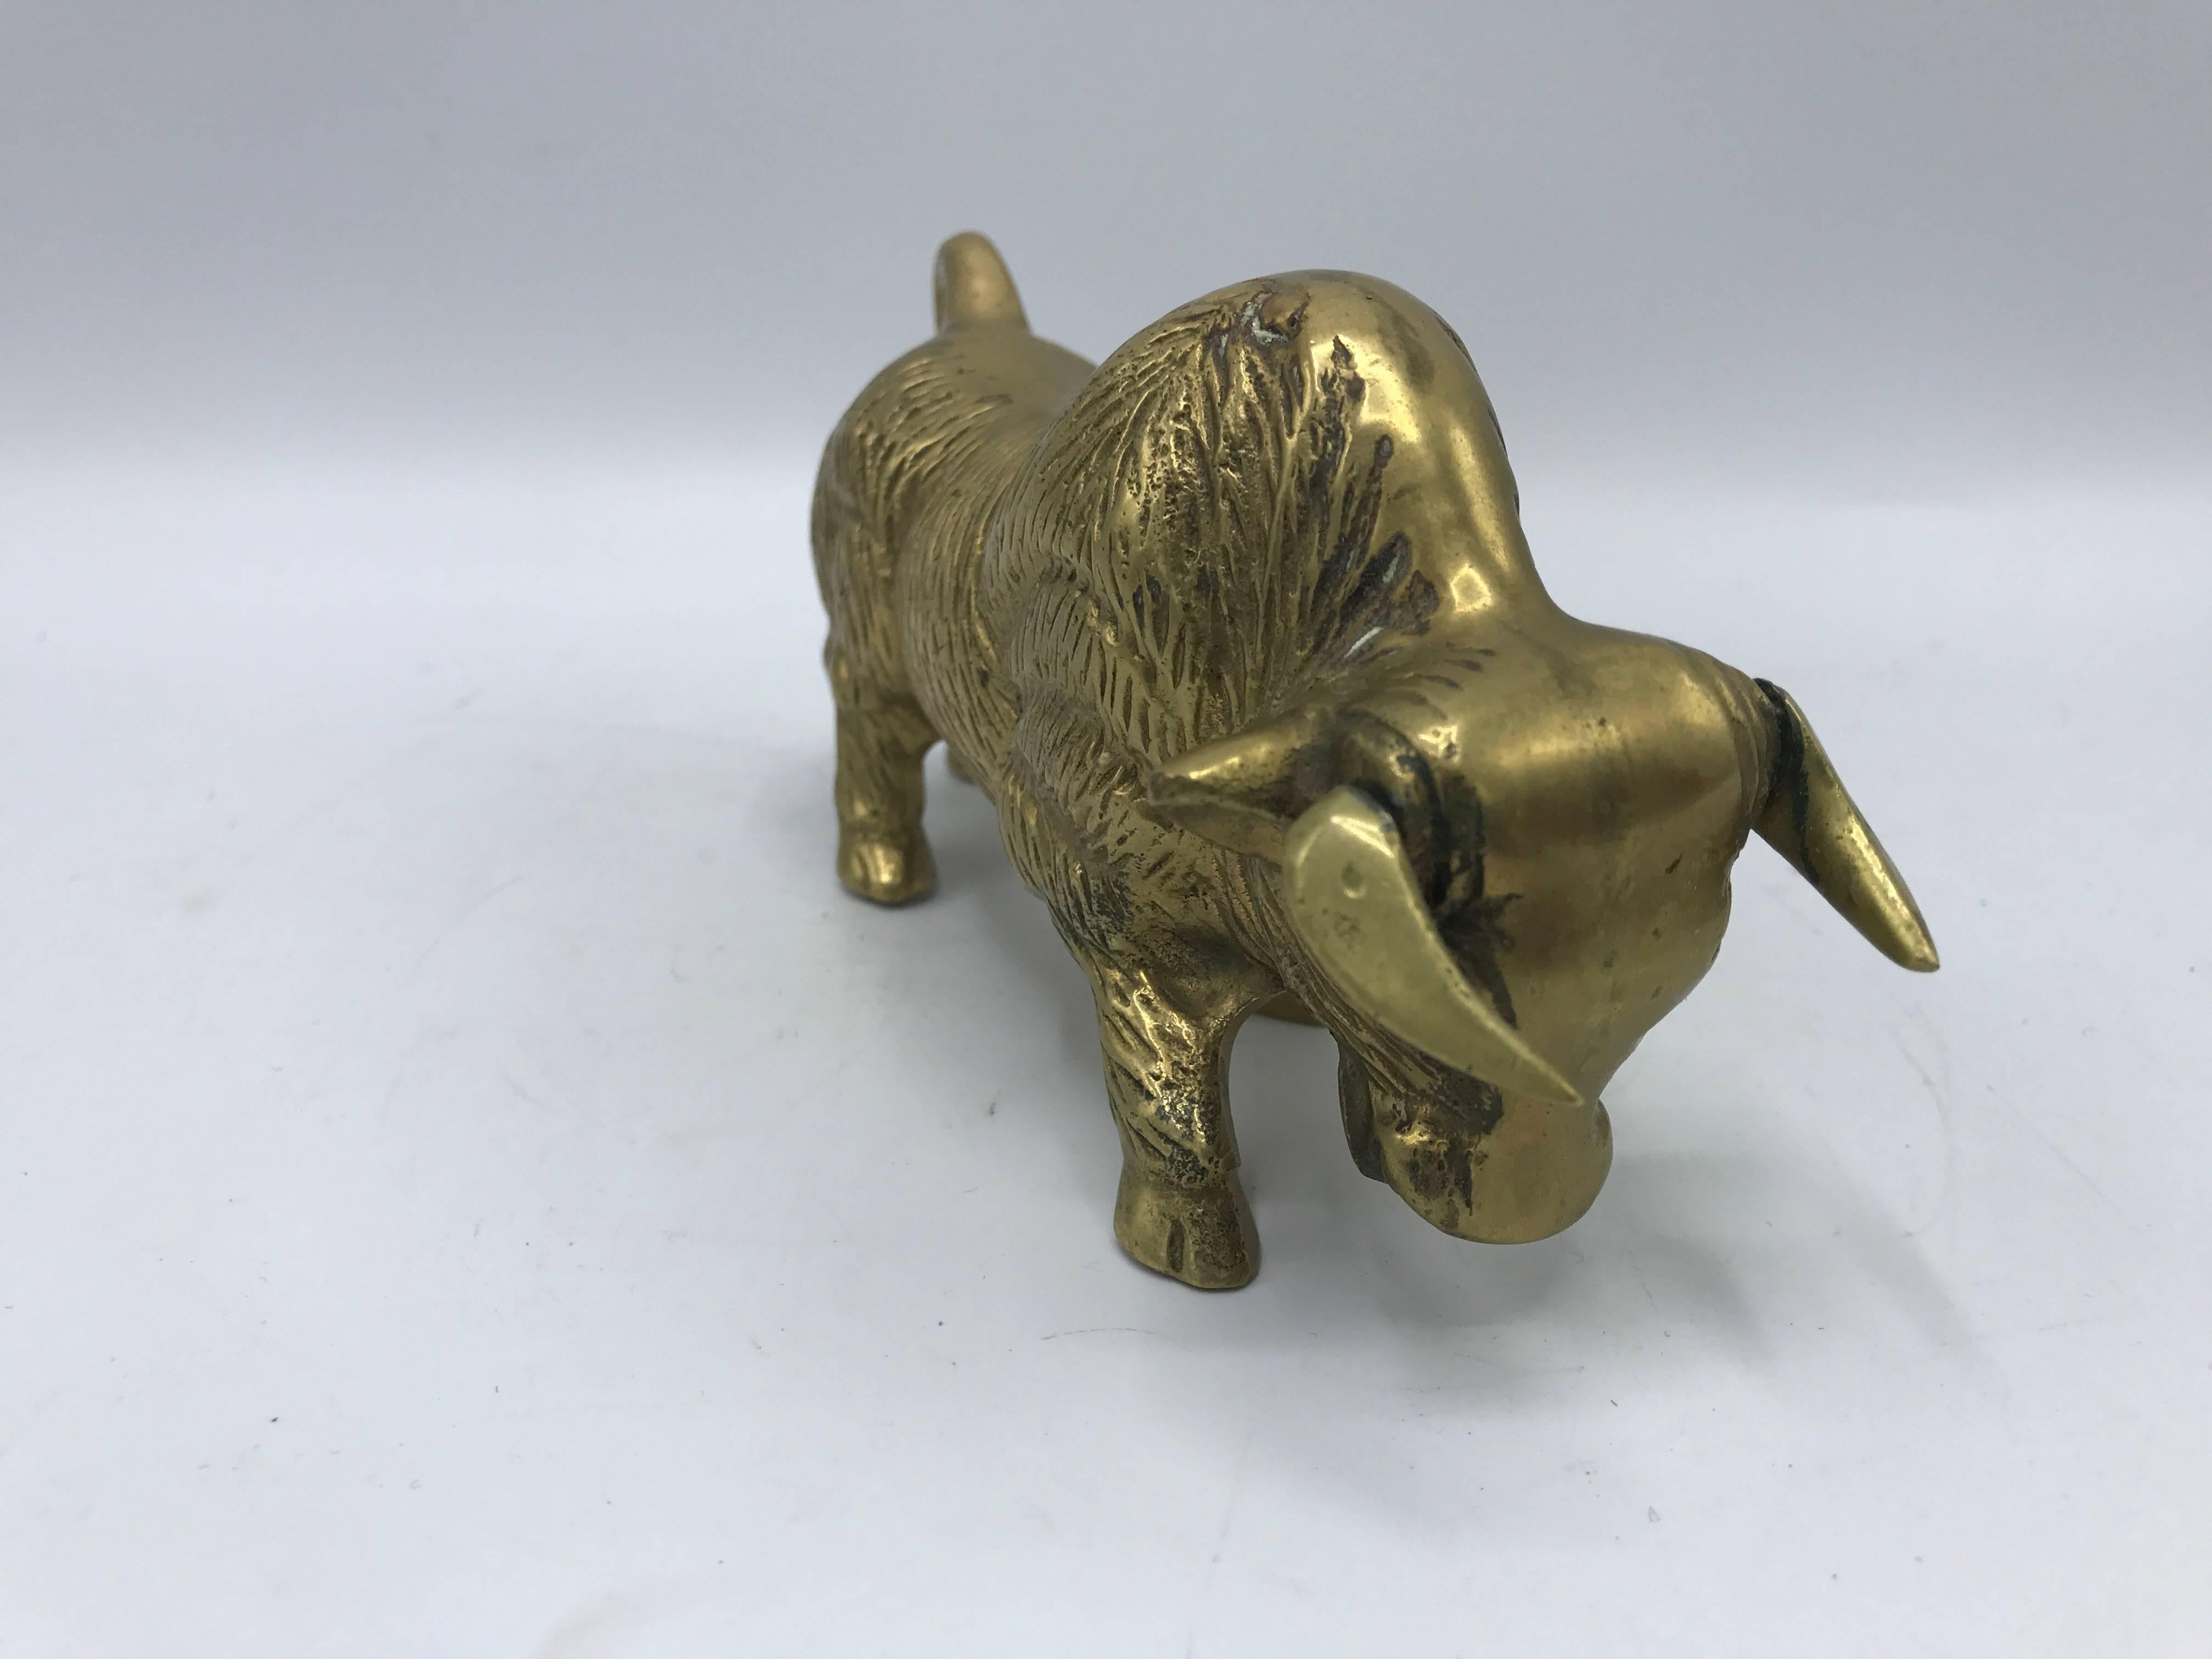 Offered is a beautiful, 1970s solid-brass bull sculpture. Heavy.